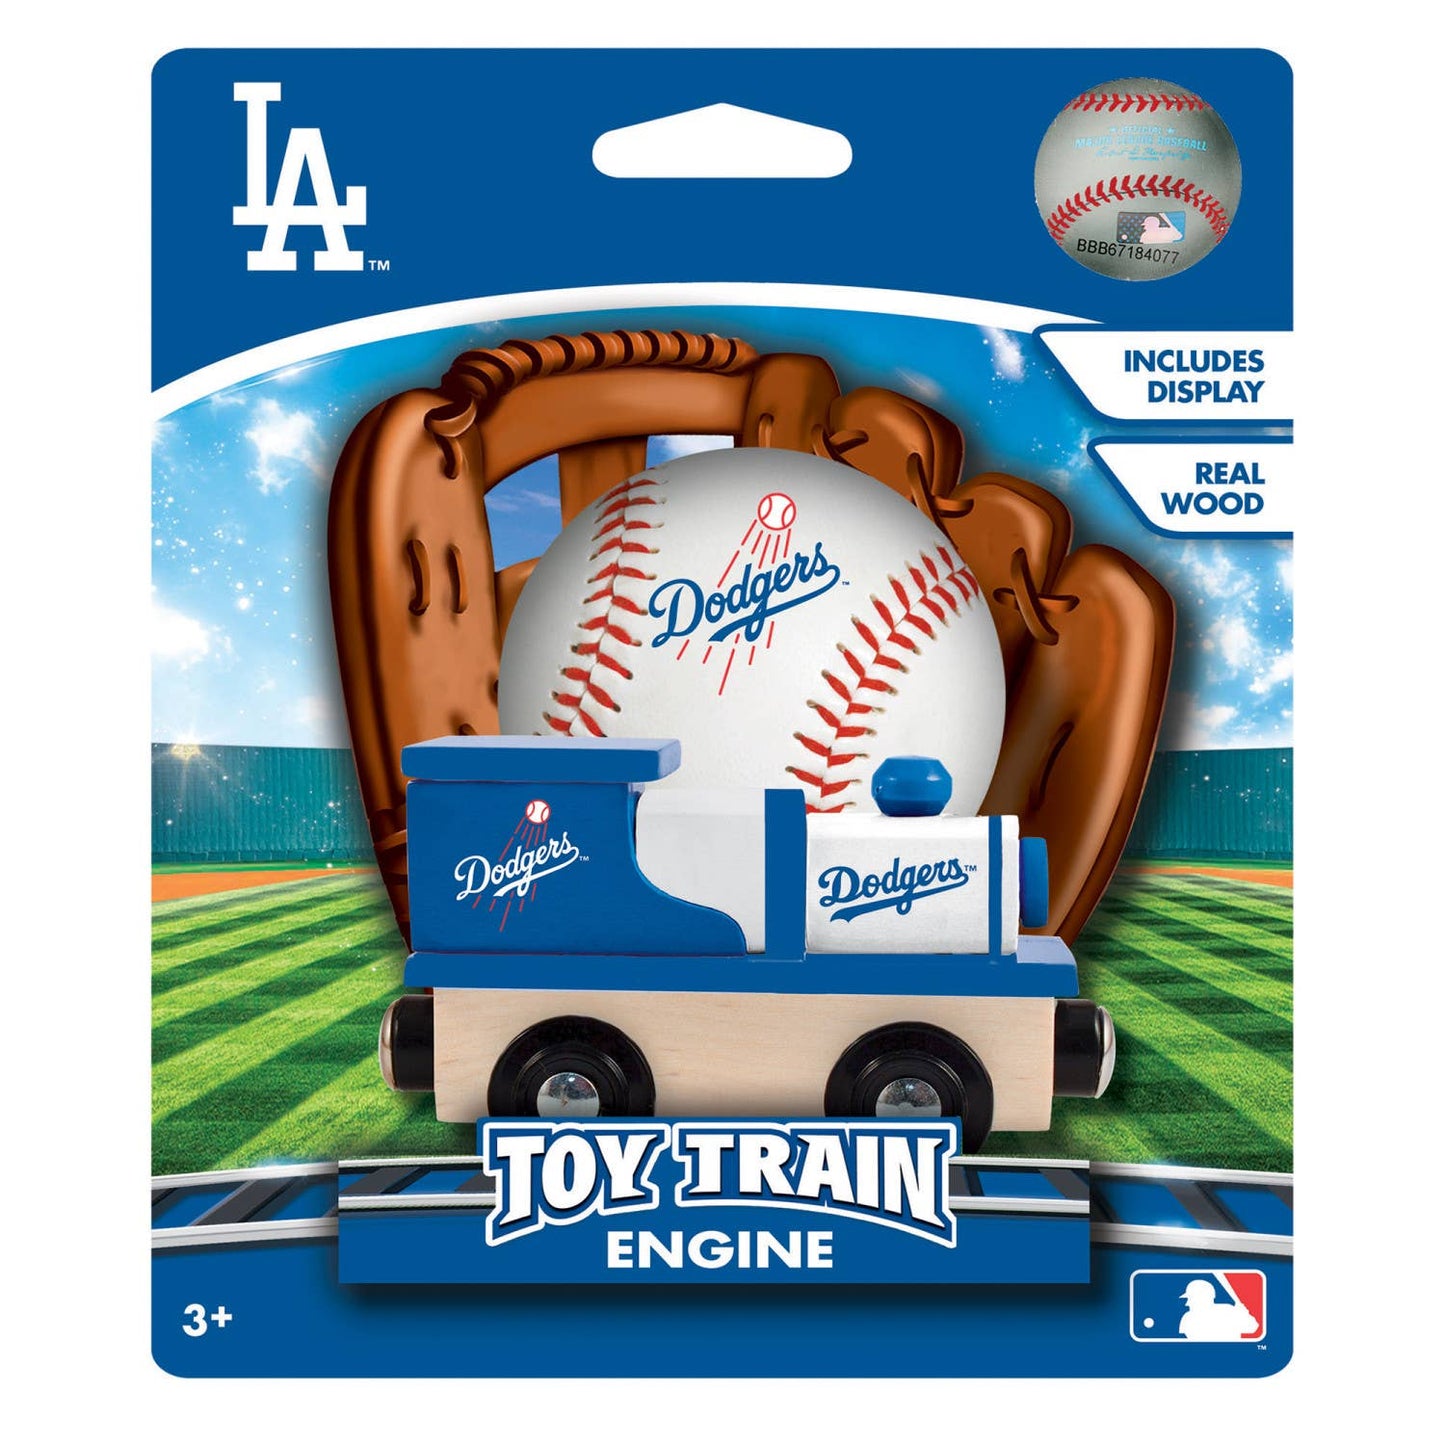 Los Angeles Dodgers Toy Train Engine